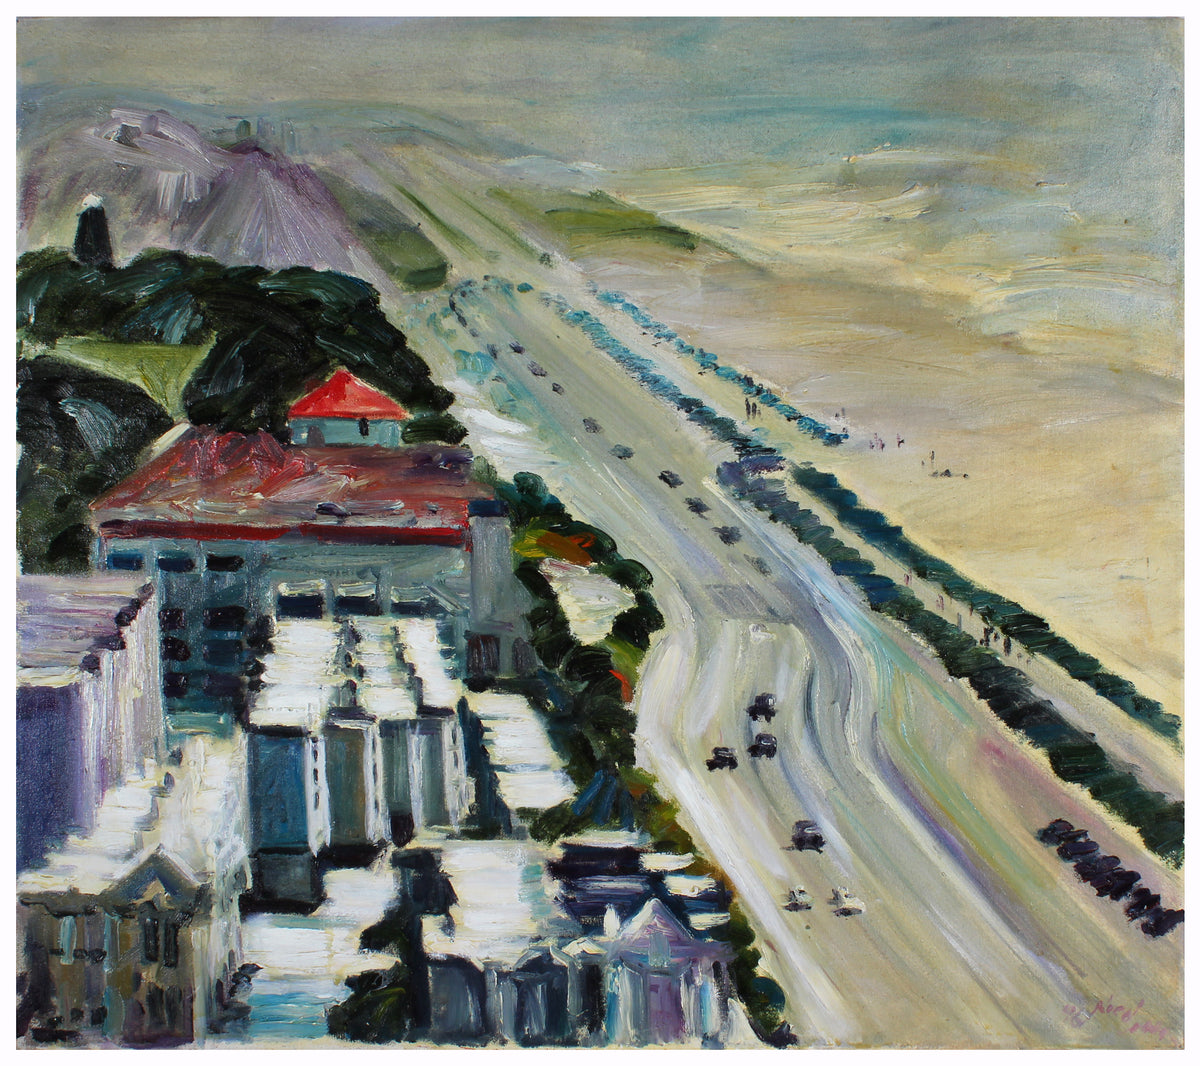 Bay Area Freeway by the Sea&lt;br&gt;1996 Oil&lt;br&gt;&lt;br&gt;#A5685